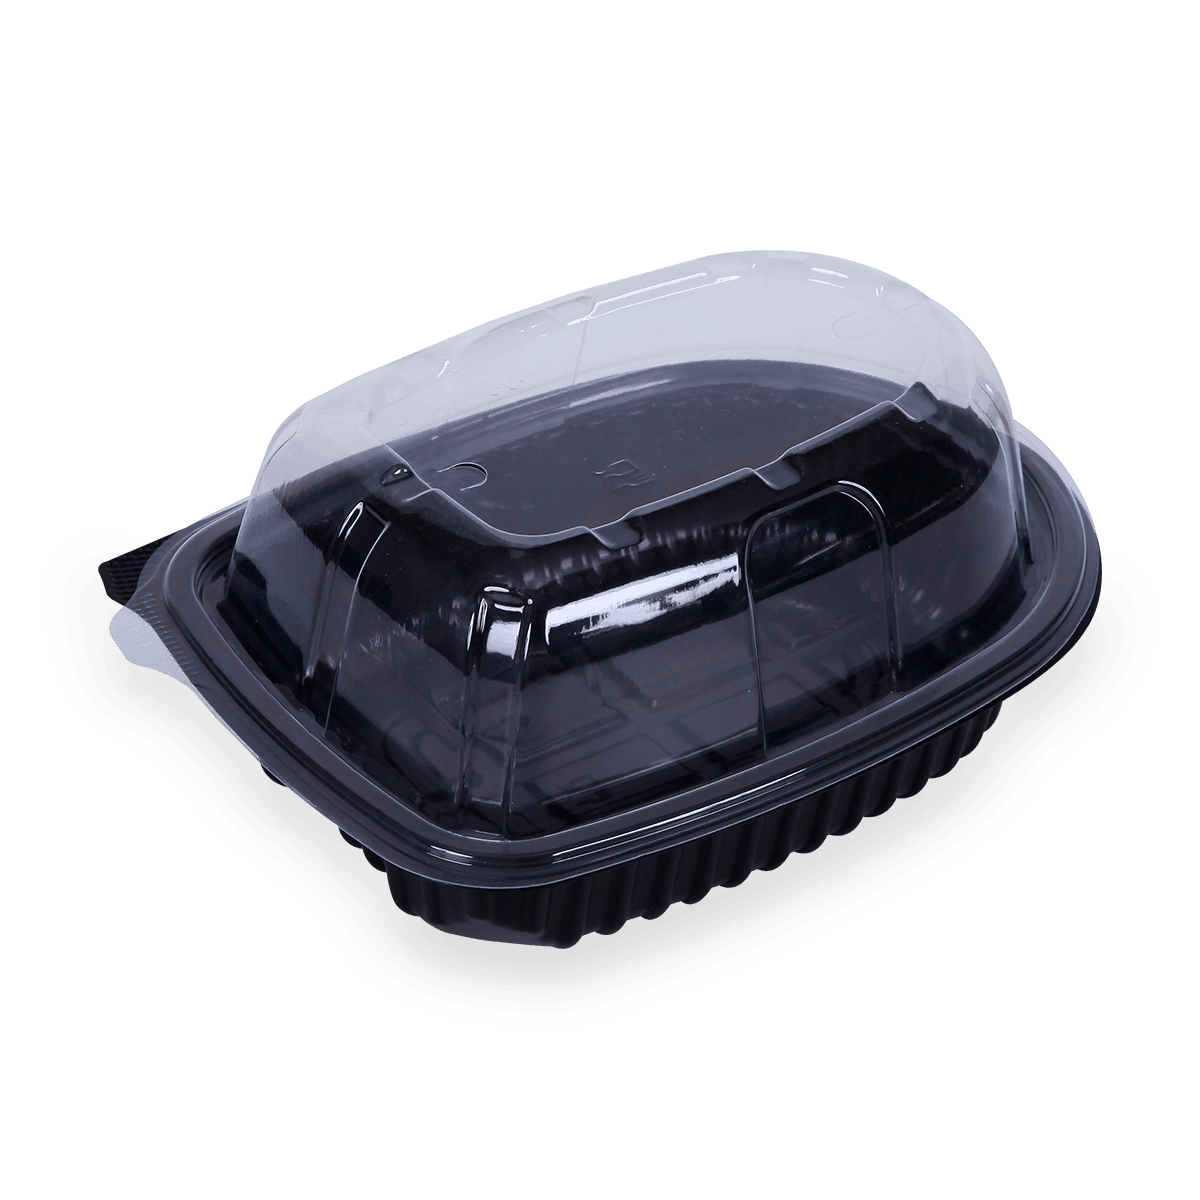 Black plastic pp chicken roaster Take-out  packaging containers